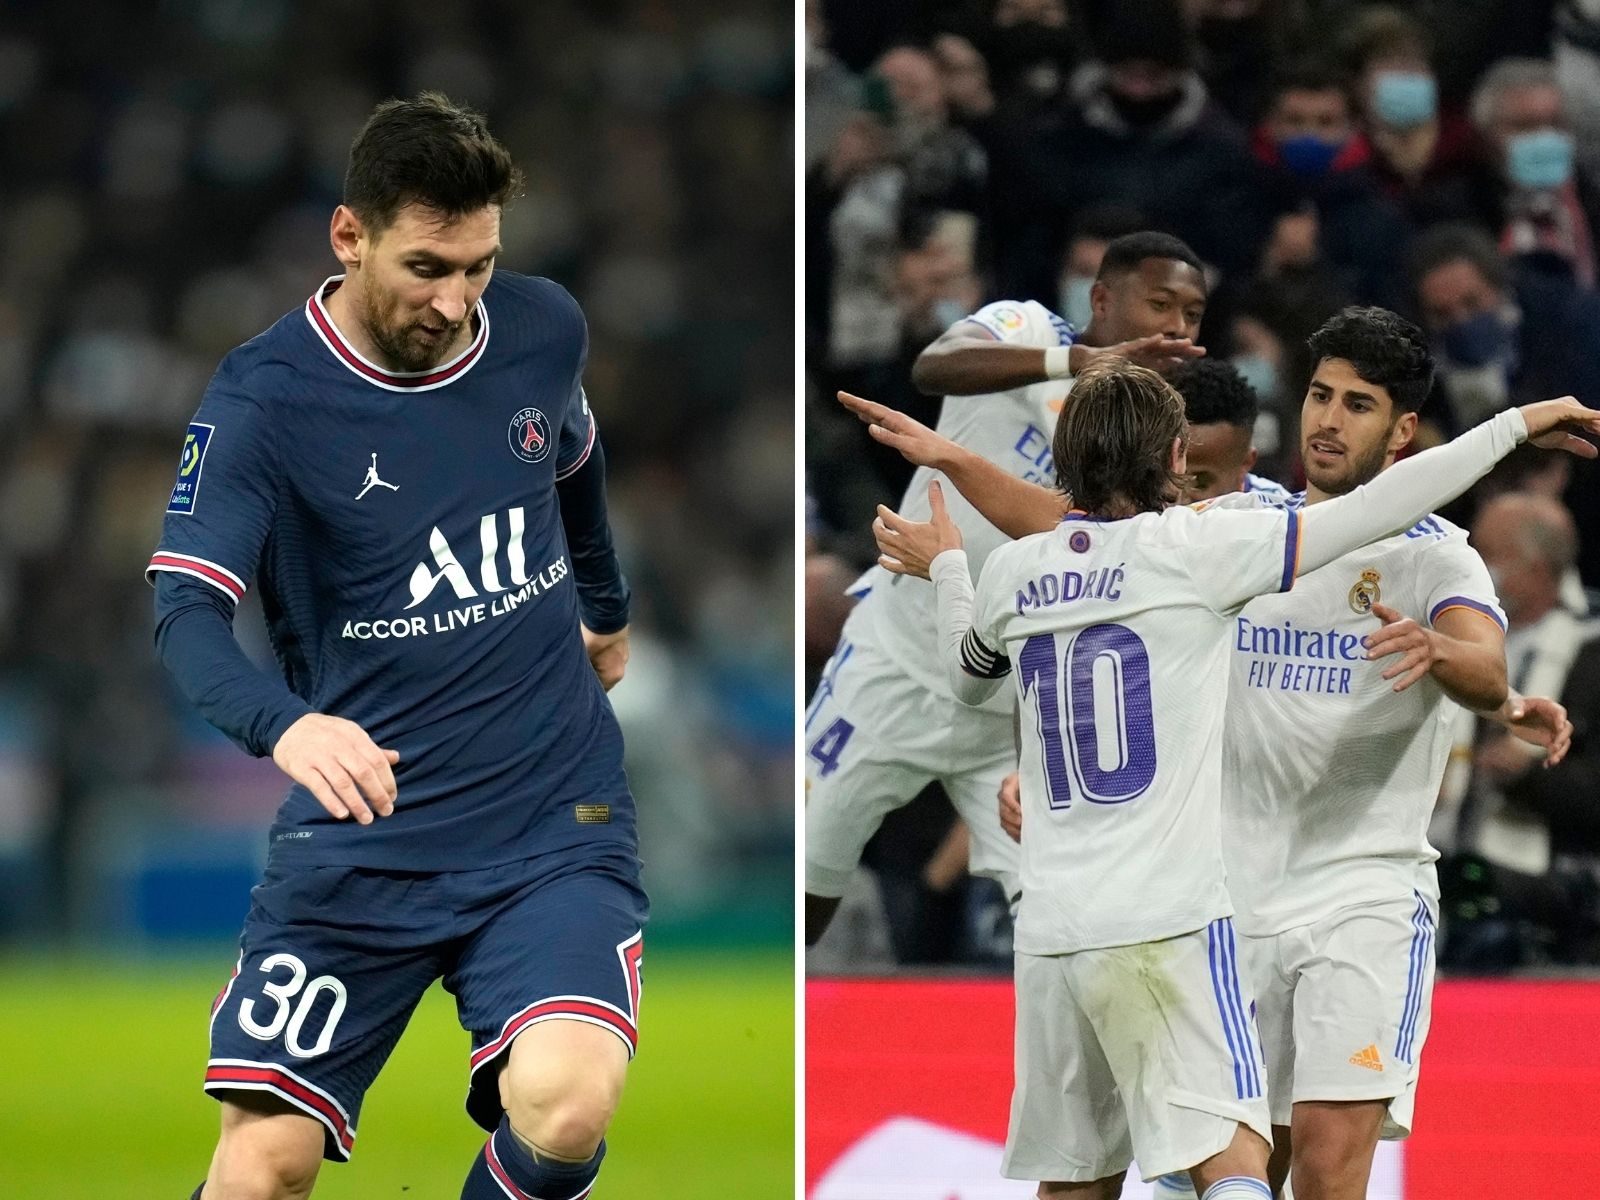 UEFA Champions League 2021-22 Real Madrid vs Paris Saint-Germain LIVE Streaming When and Where to Watch Online, TV Telecast, Team News